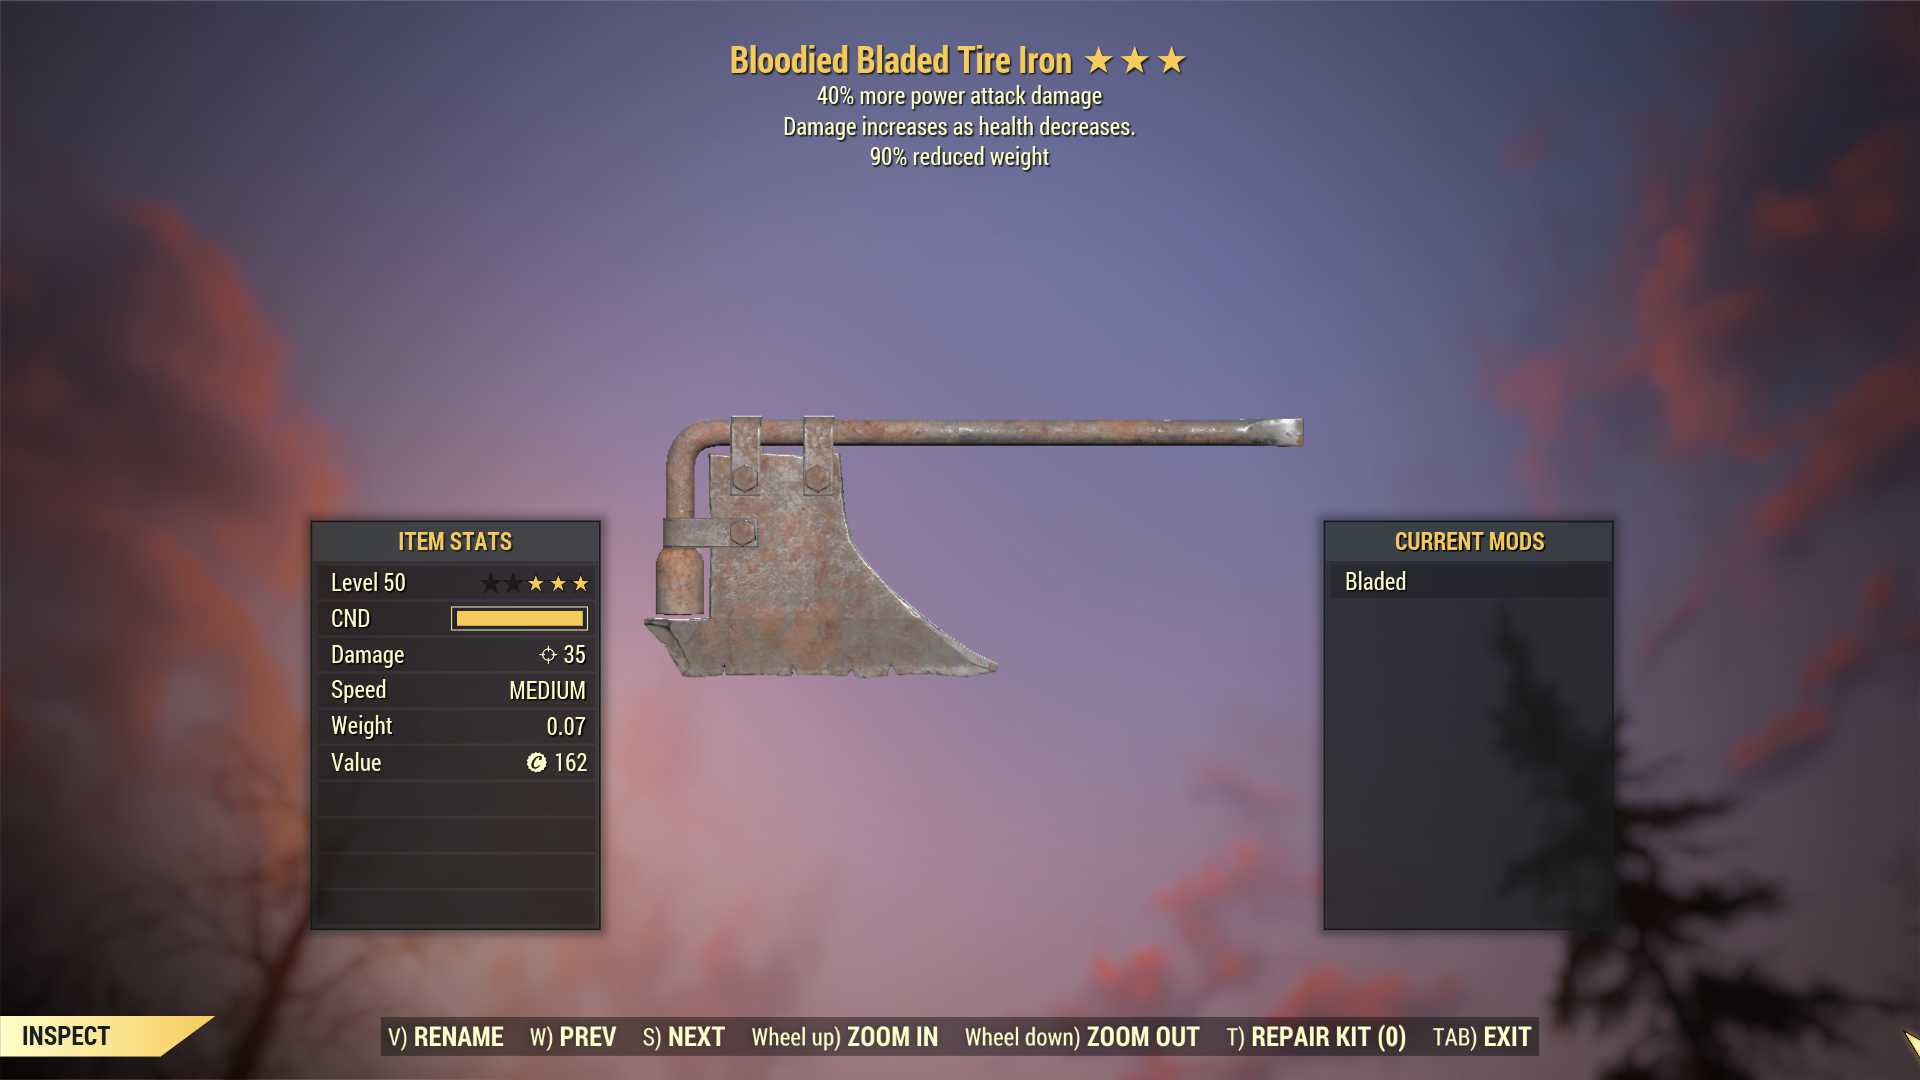 Bloodied Tire Iron (+40% damage PA, 90% reduced weight)